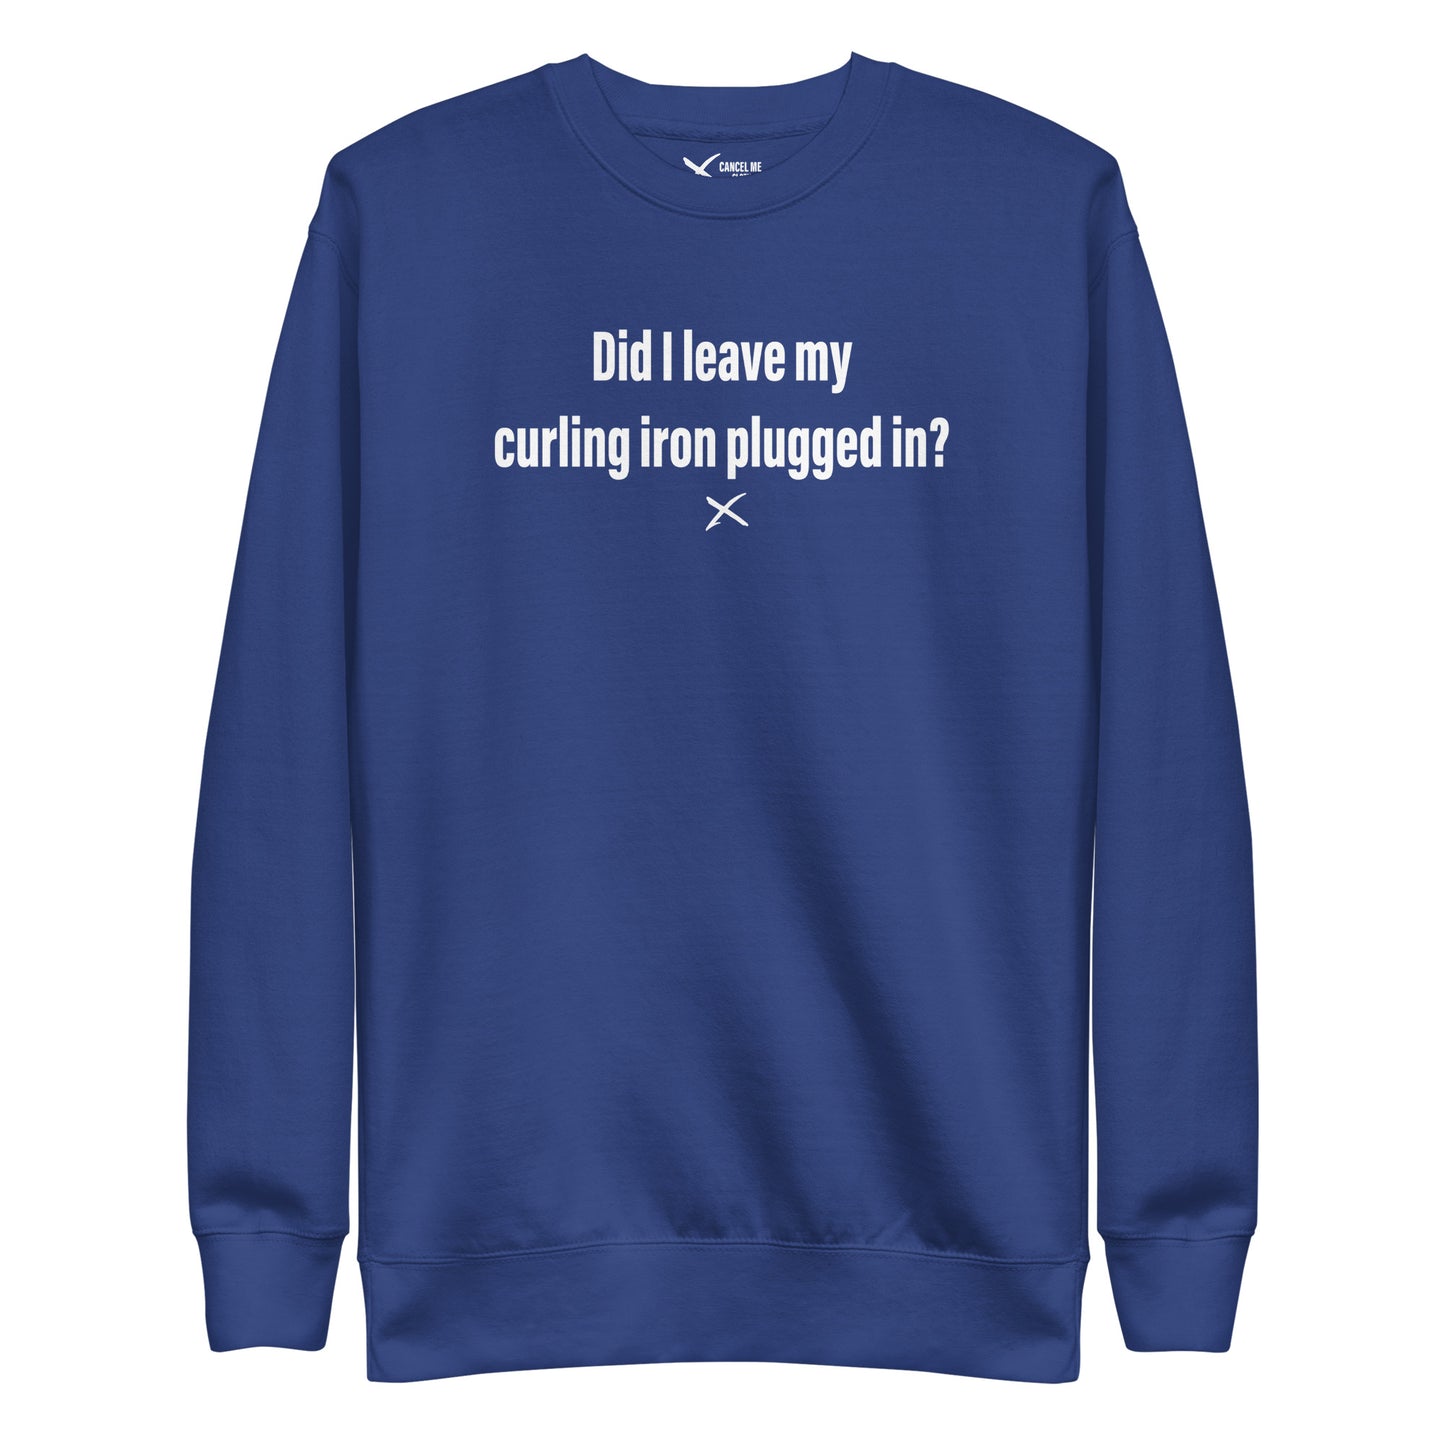 Did I leave my curling iron plugged in? - Sweatshirt